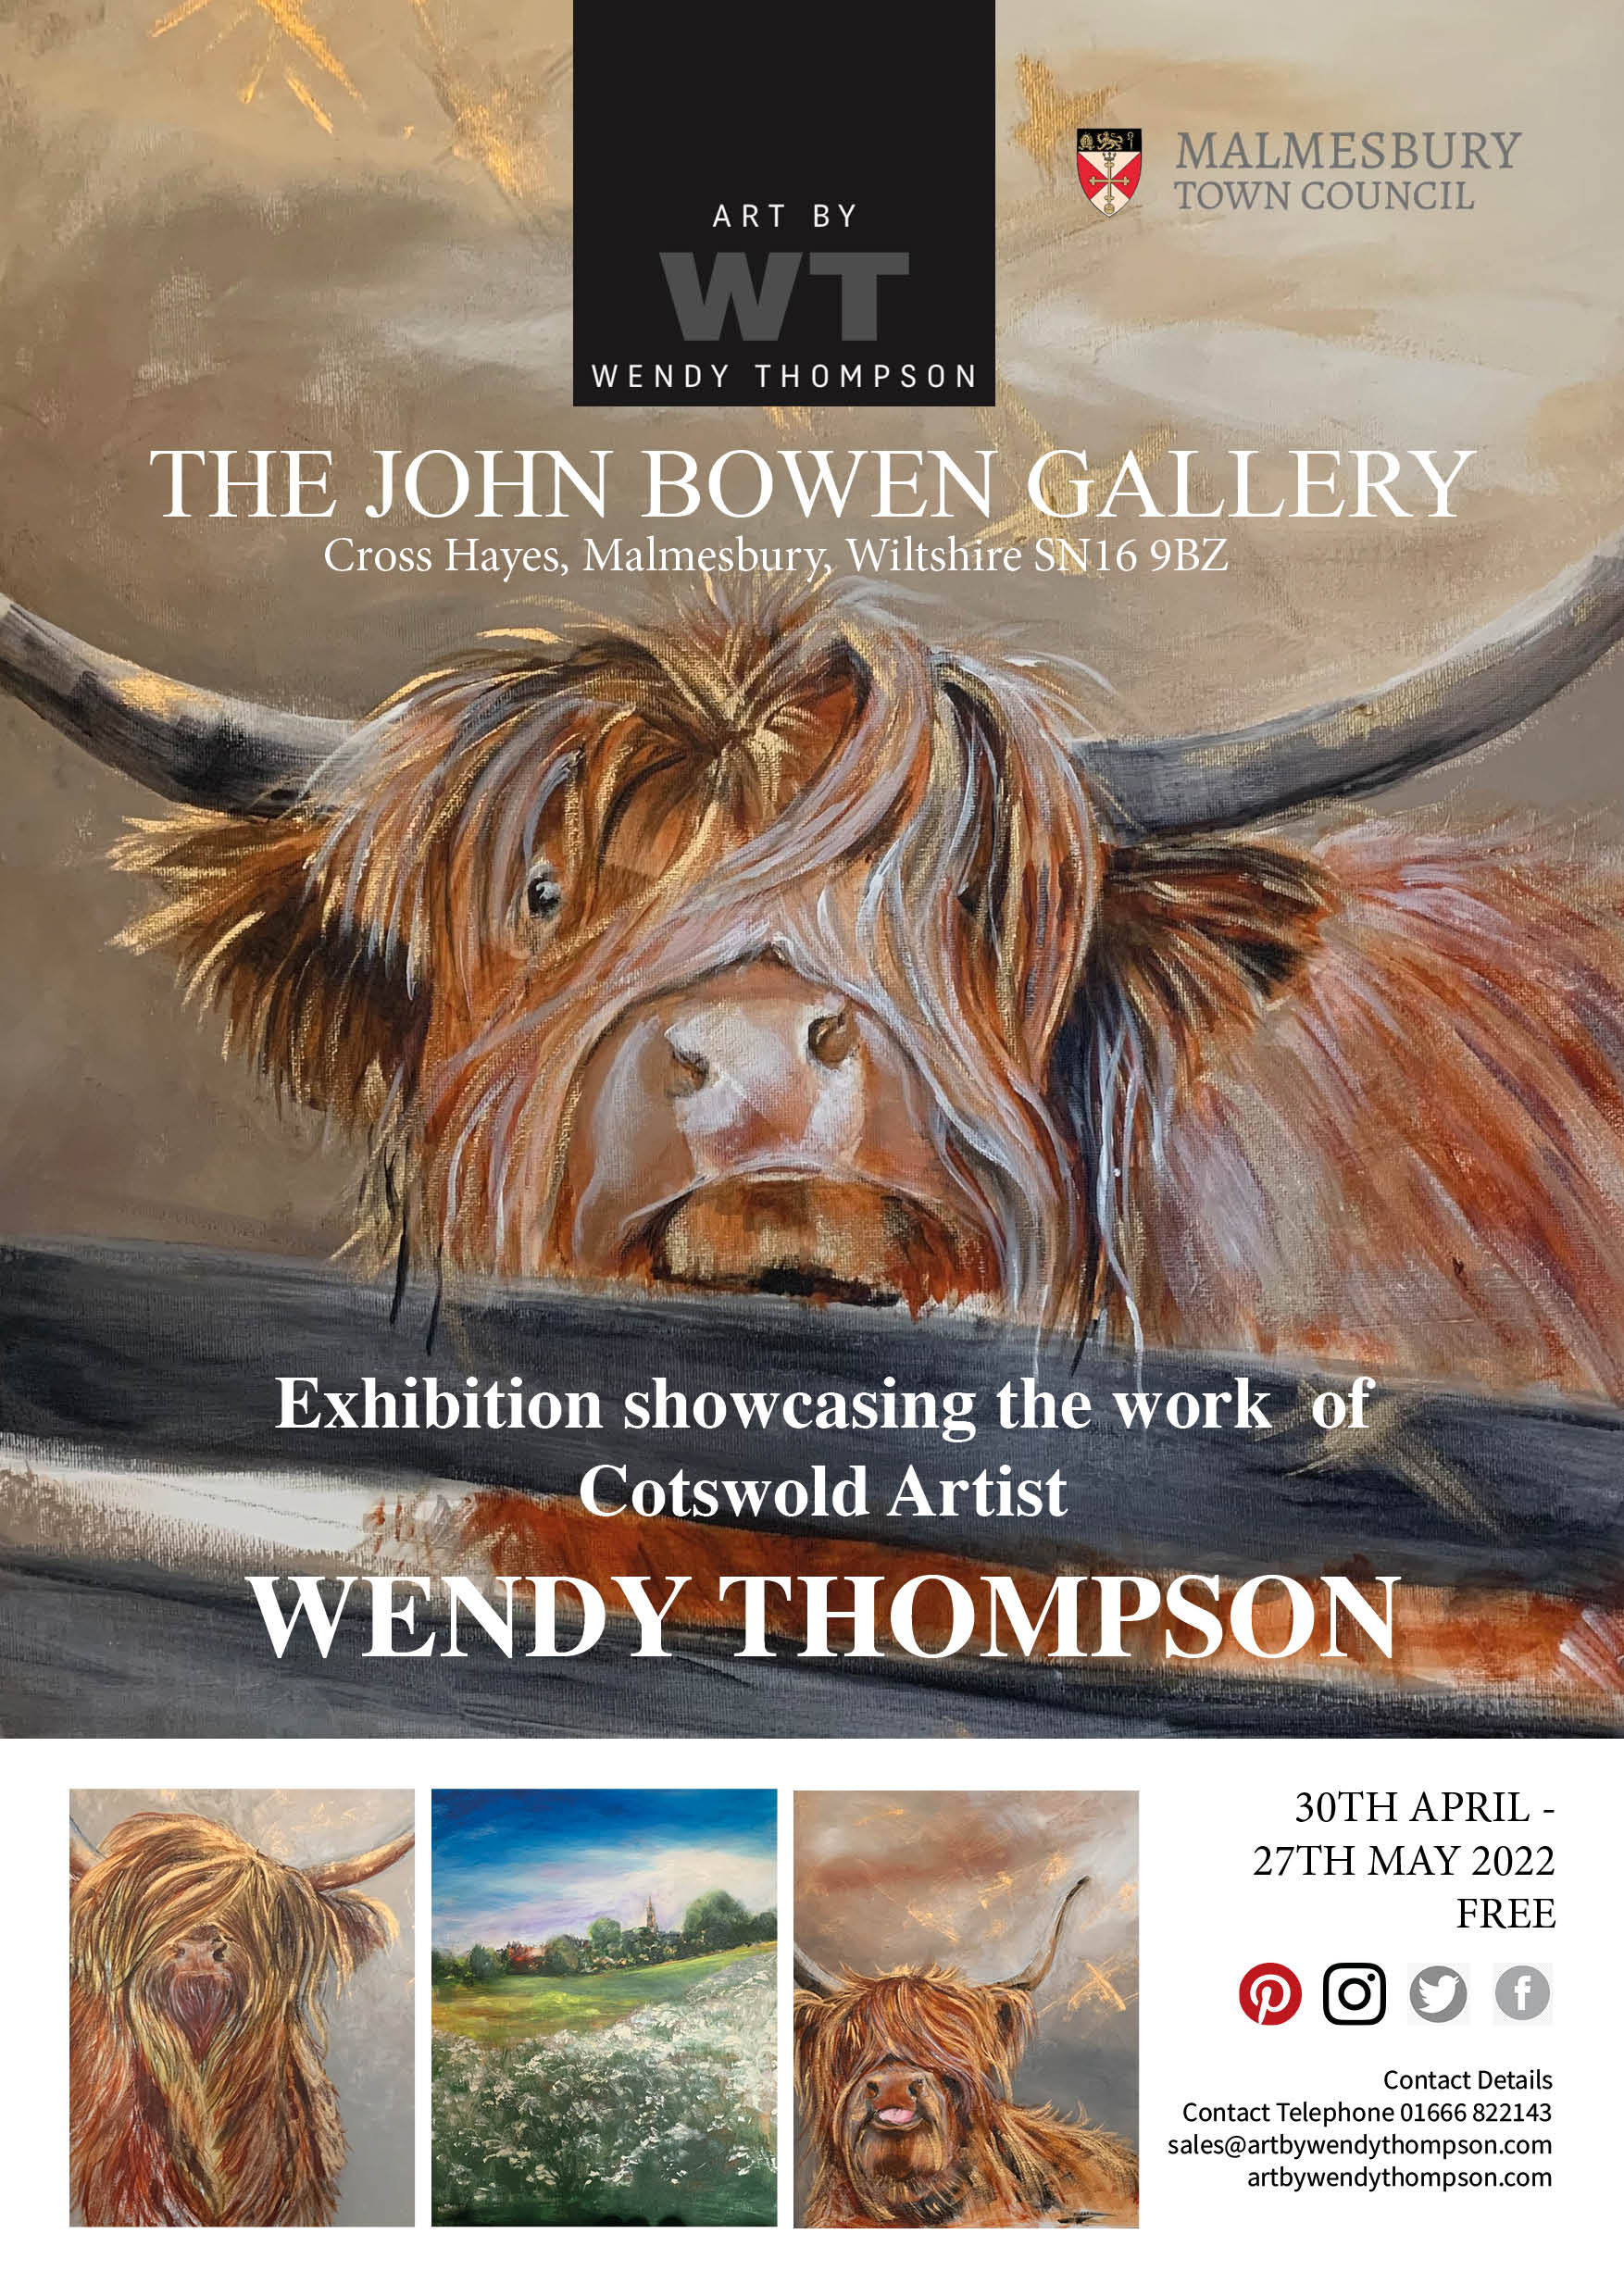 Exhibition Showcasing the Work of Wendy Thompson at The John Bowen Gallery 30th April to 26th May